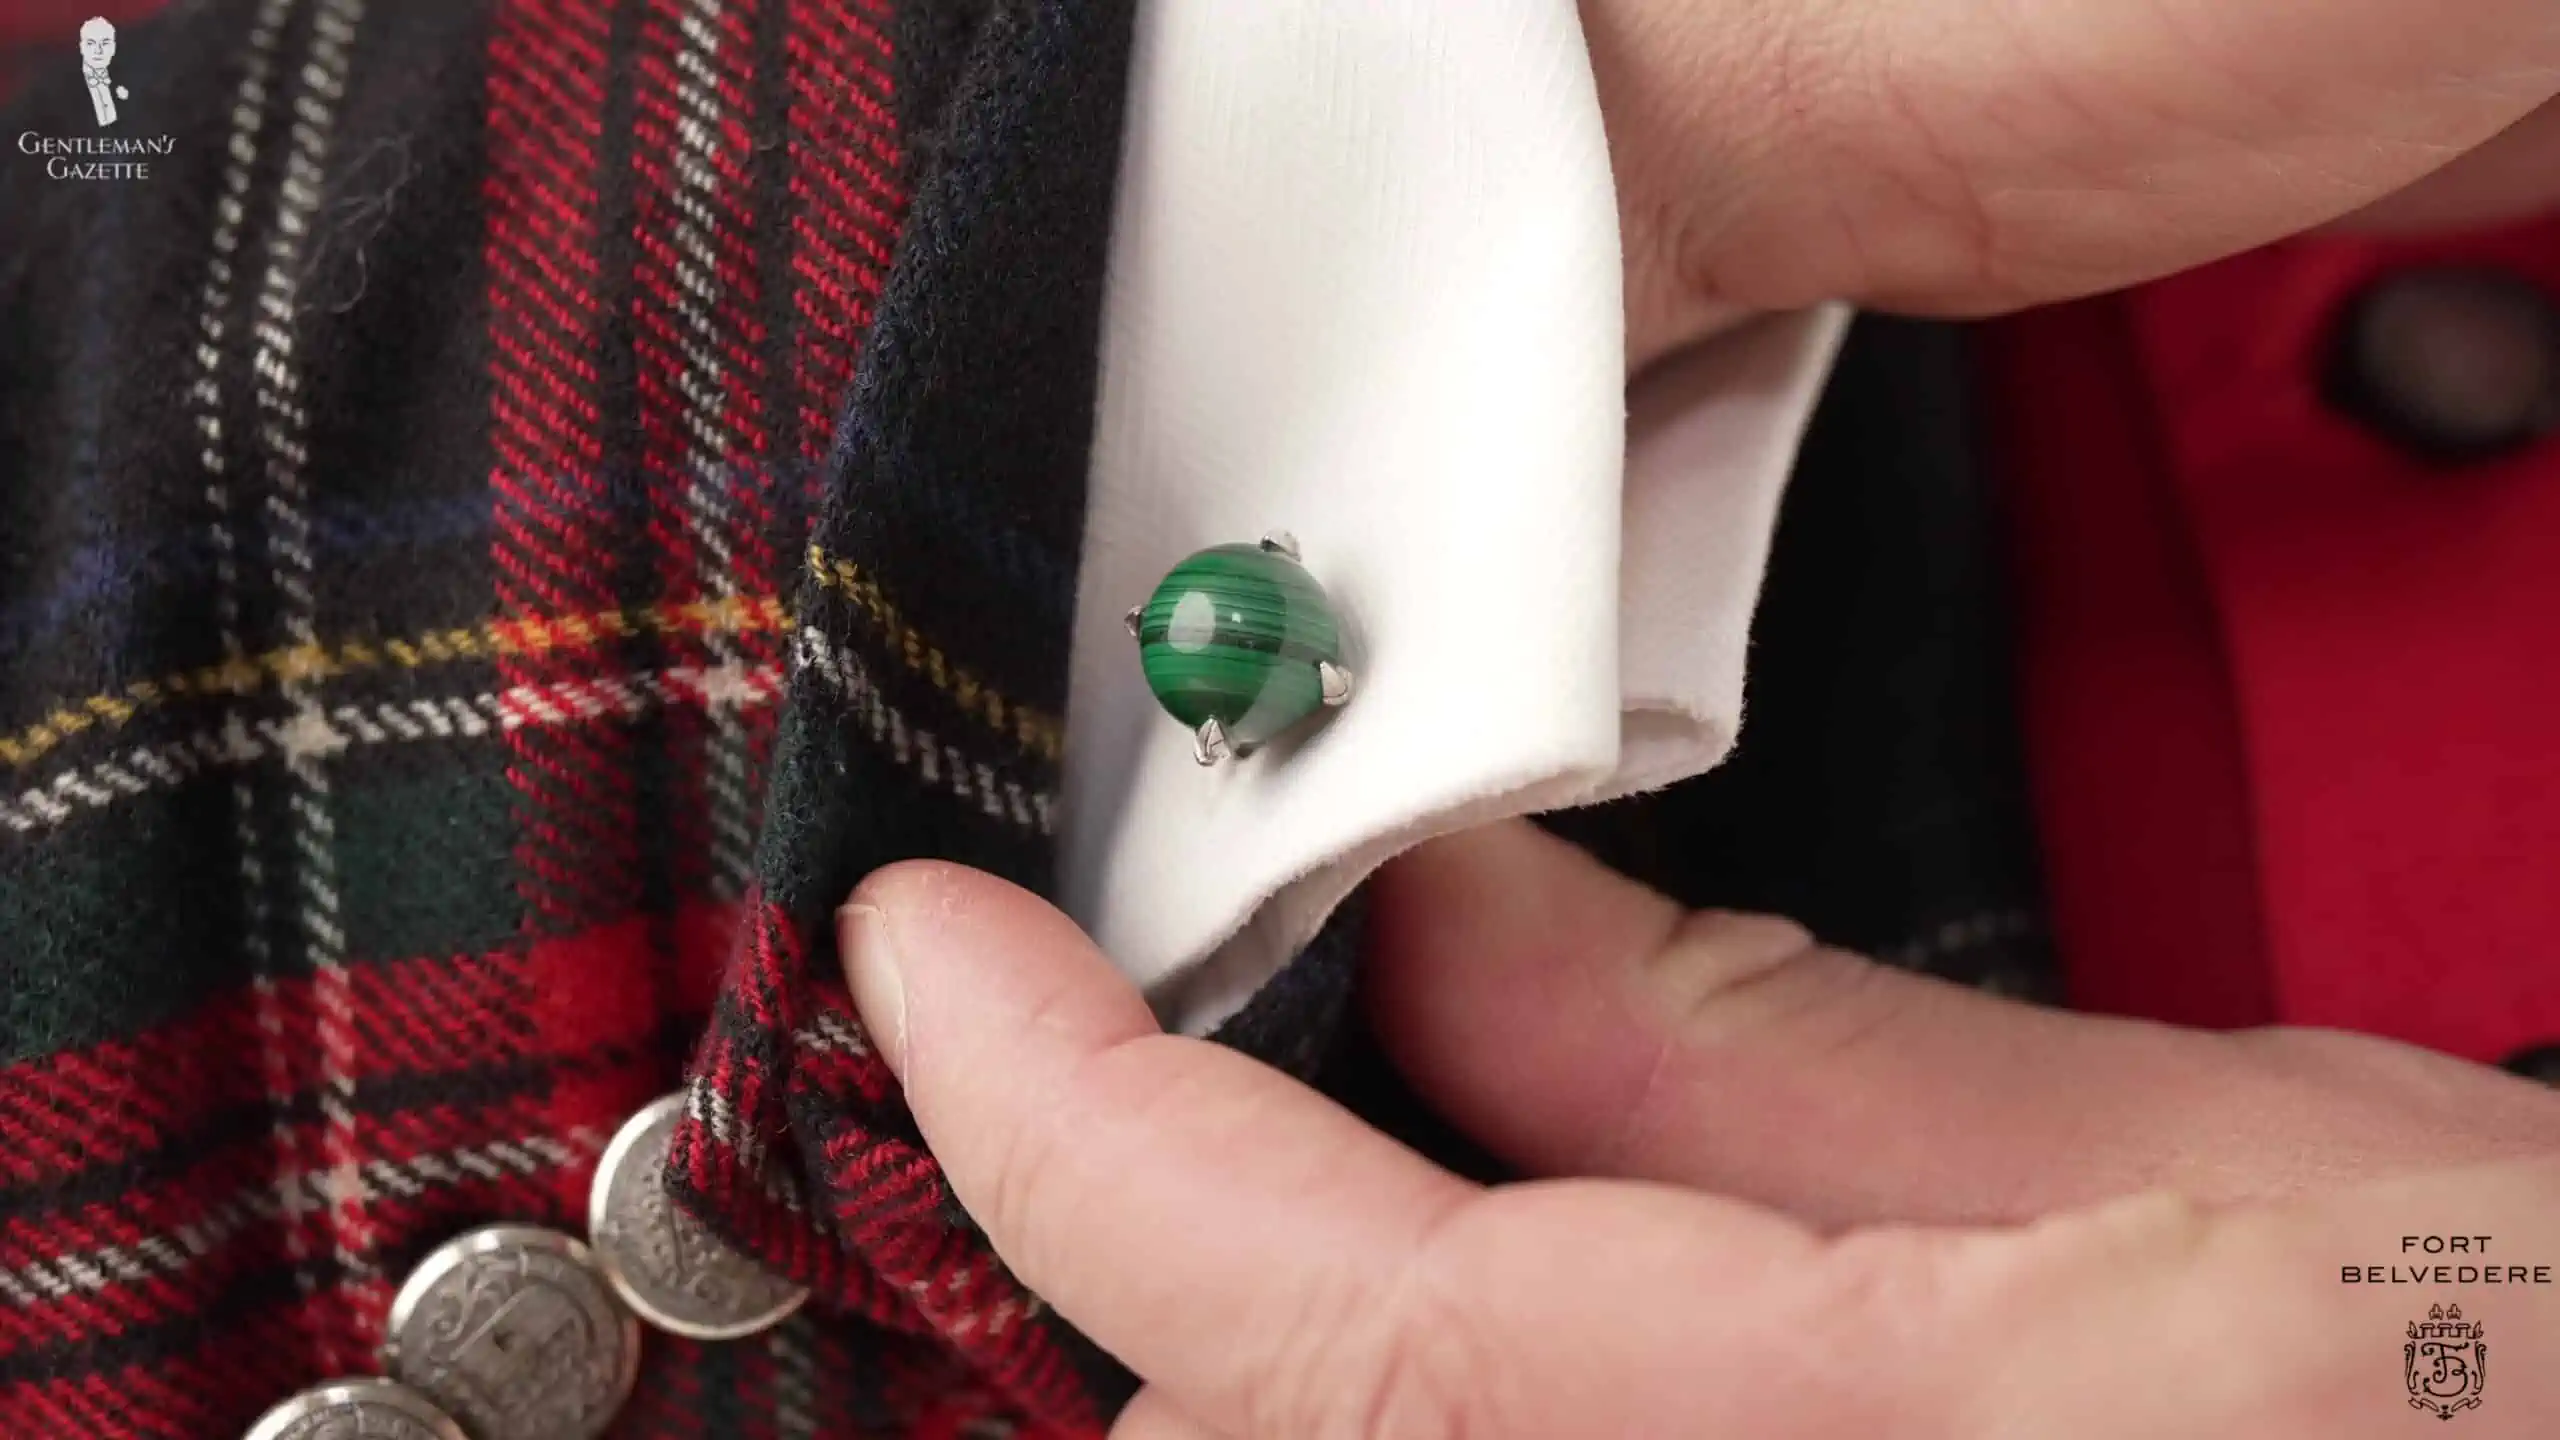 Raphael's silver and malachite cufflinks and green pinky ring pick up on the Christmas theme.